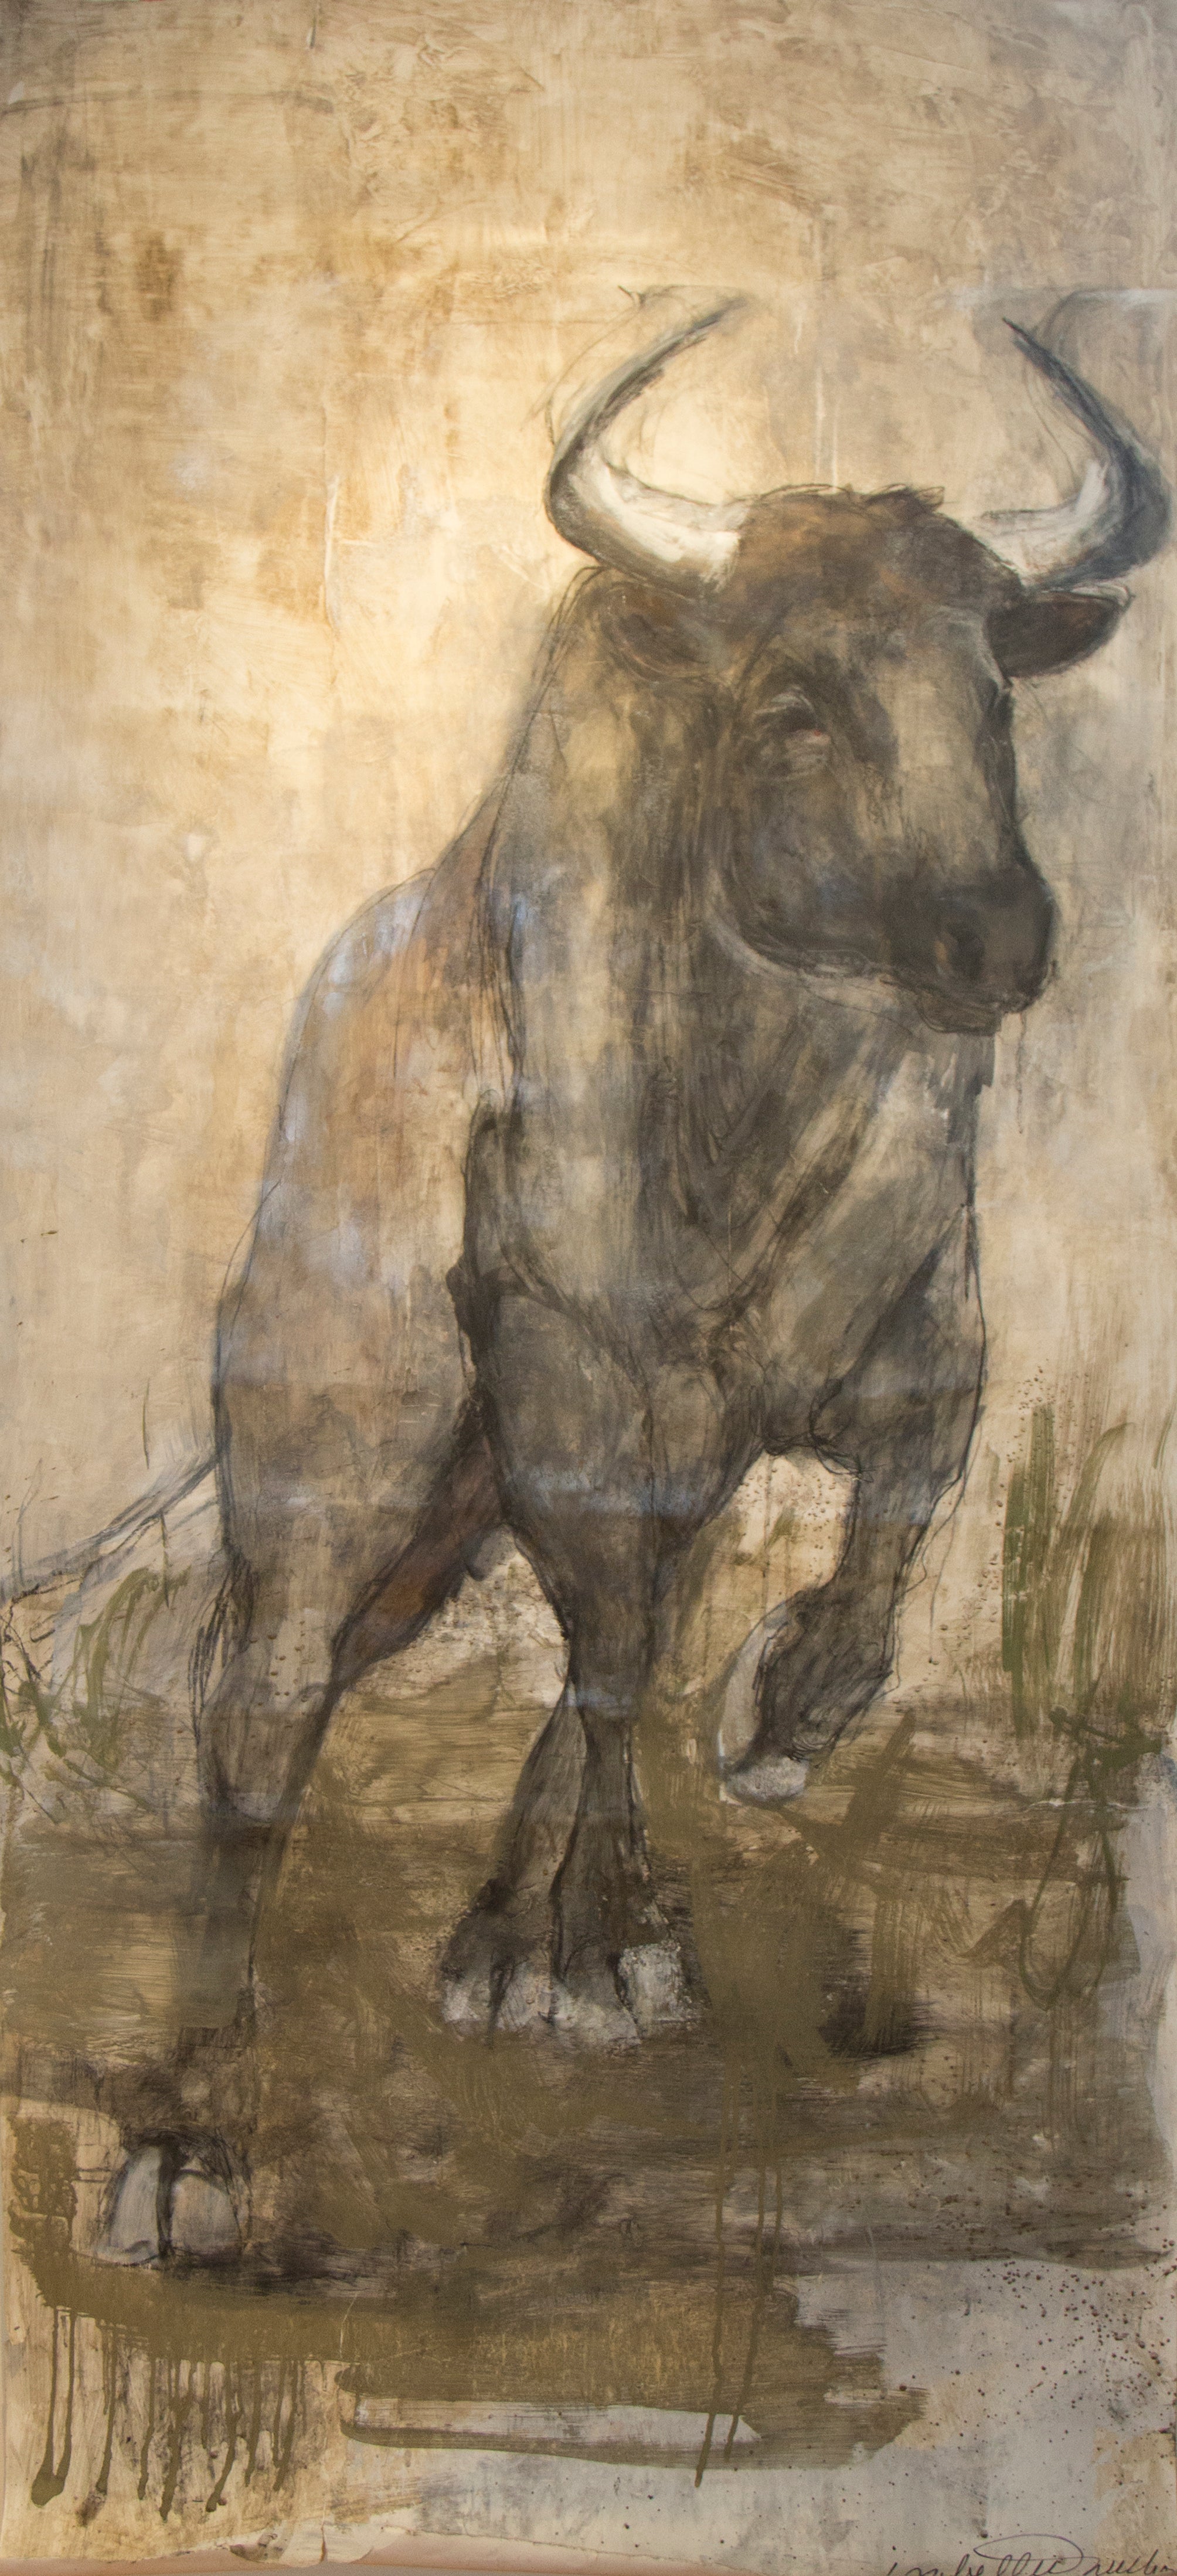 Samson the bull, energetic and exuding strength and might. A fantastic piece for a lofty wall and space. By Artist Isabelle Truchon.